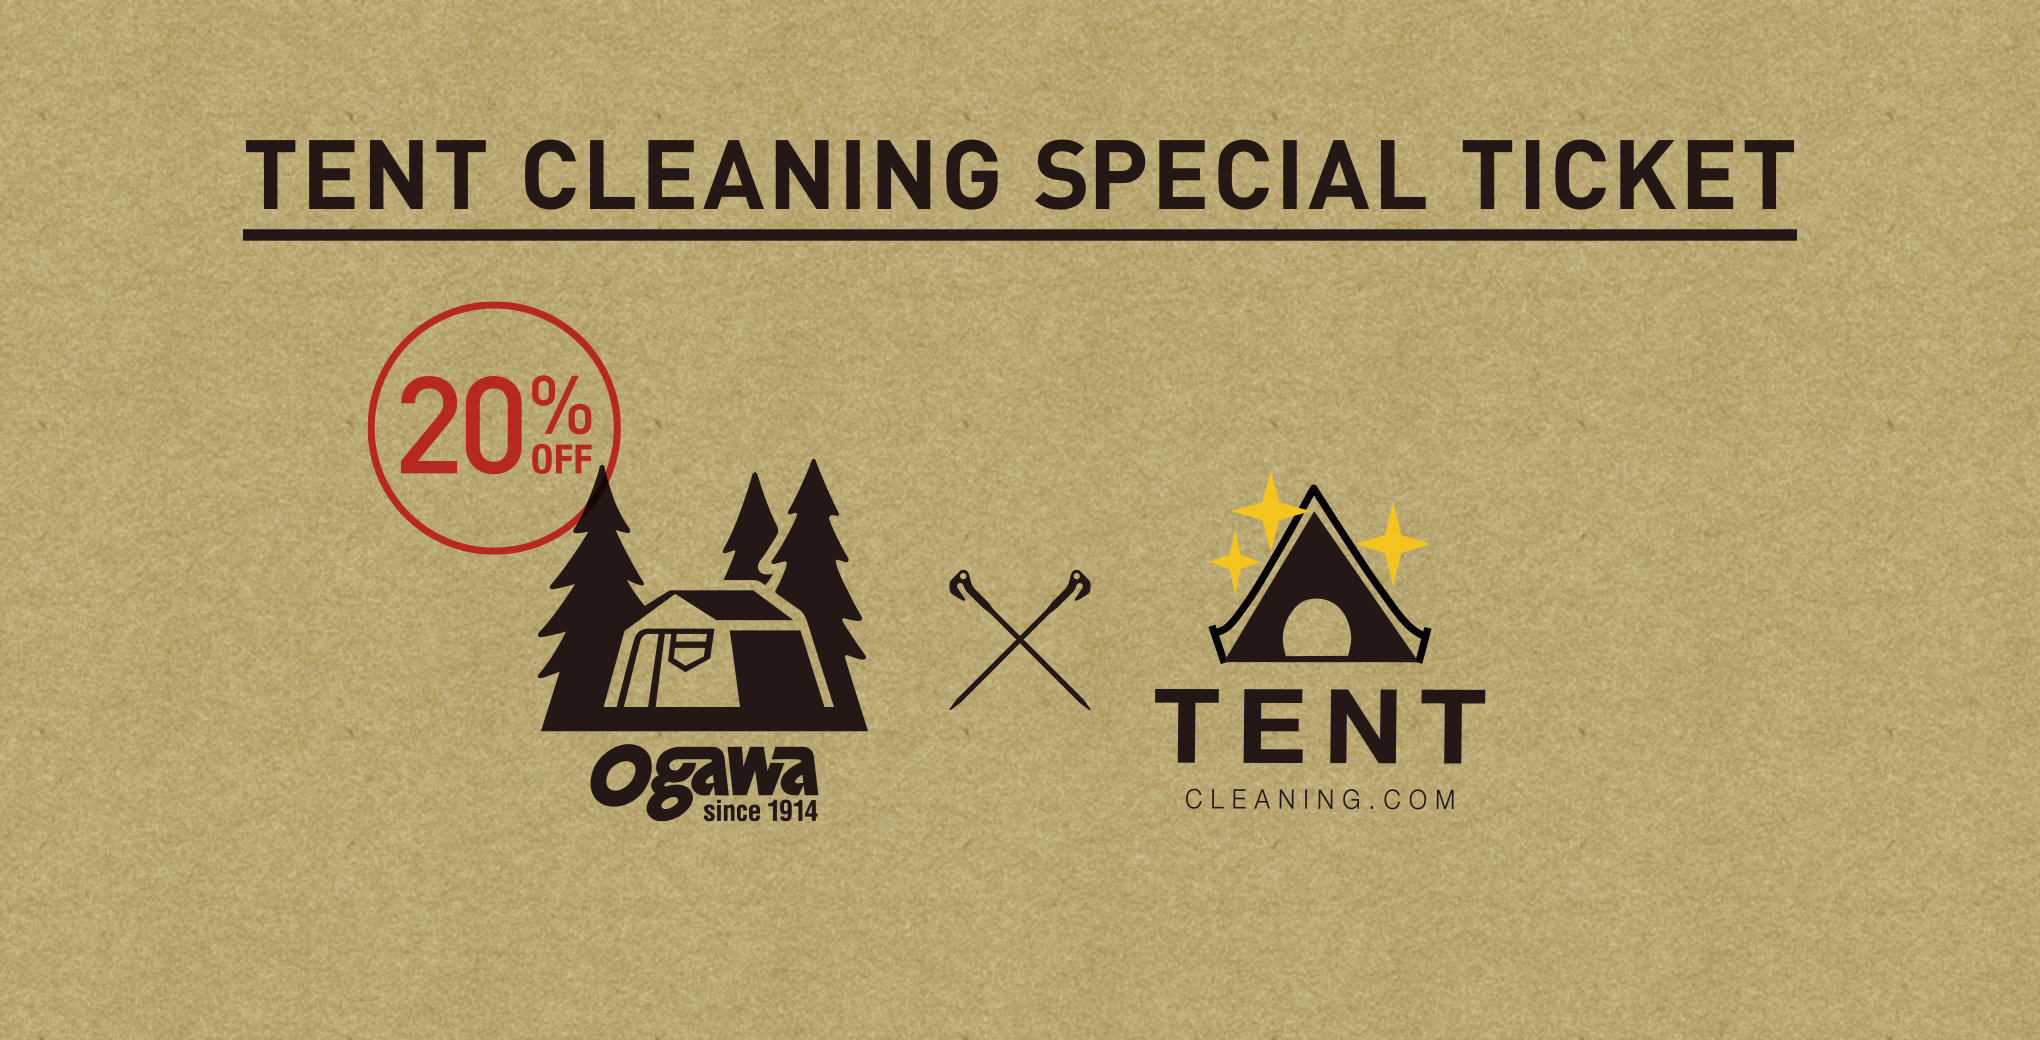 TENT CLEANING SPECIAL TICKET